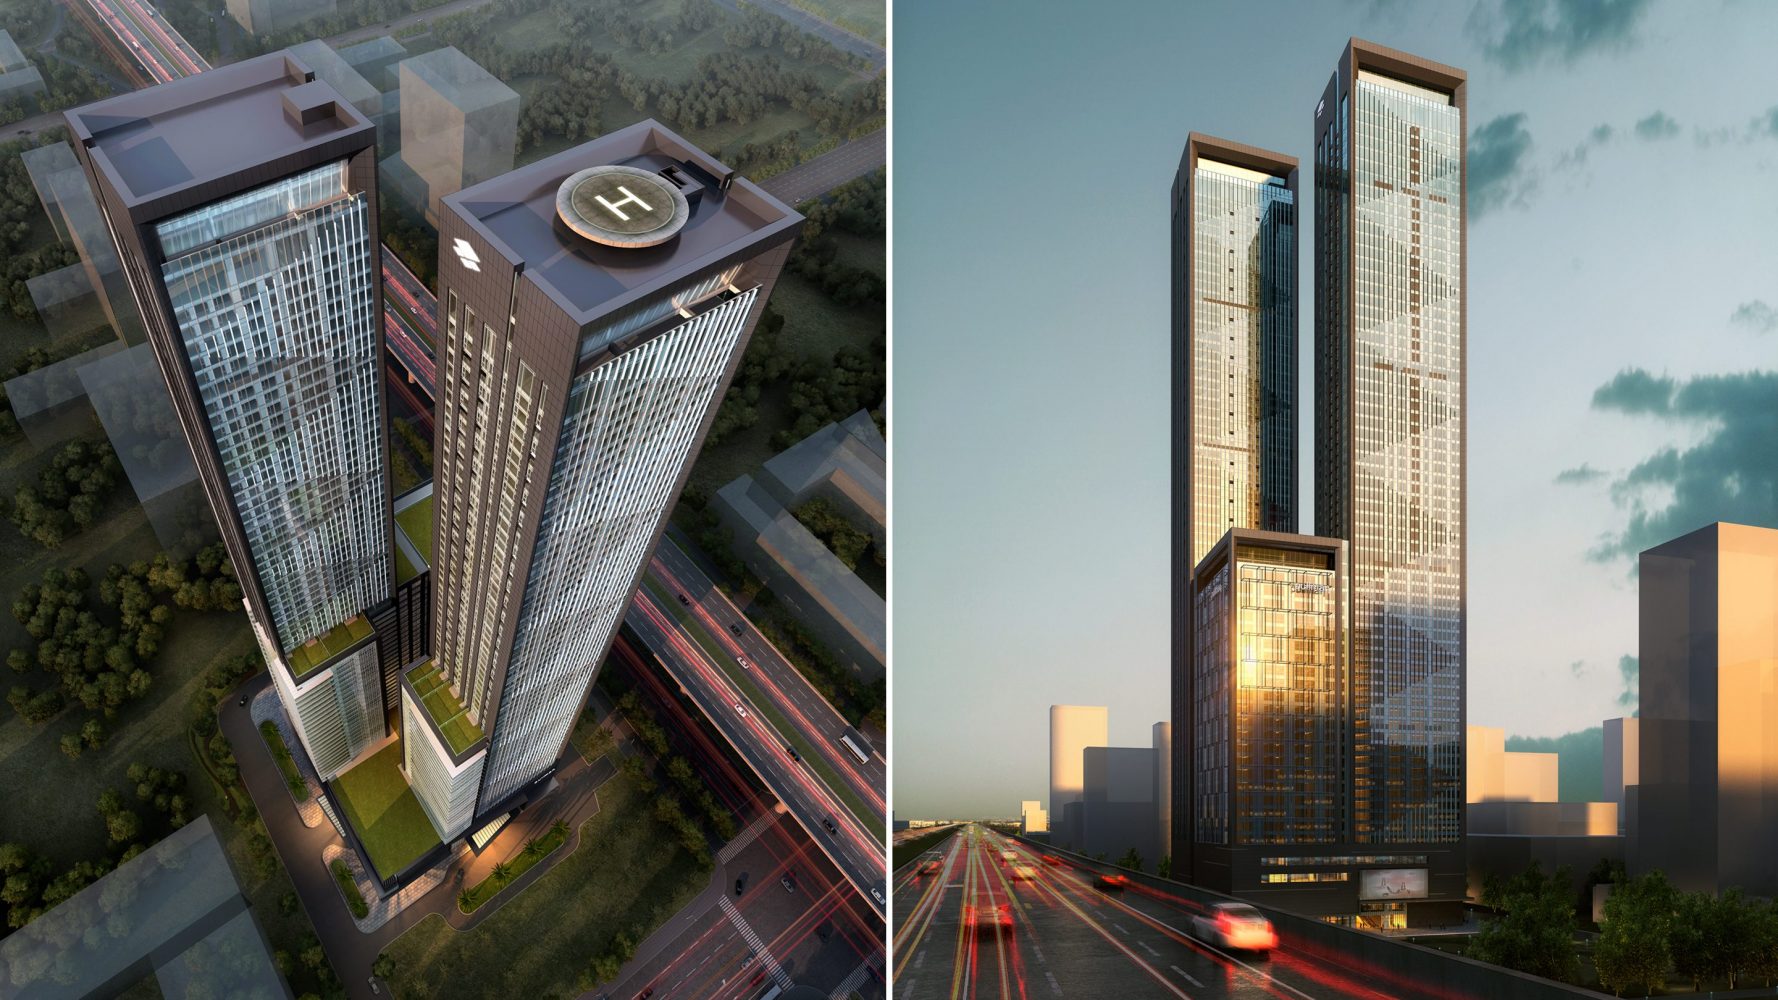 HangZhou ZhuoYue Pullman Hotel and Twin Towers, by Archilier Architecture